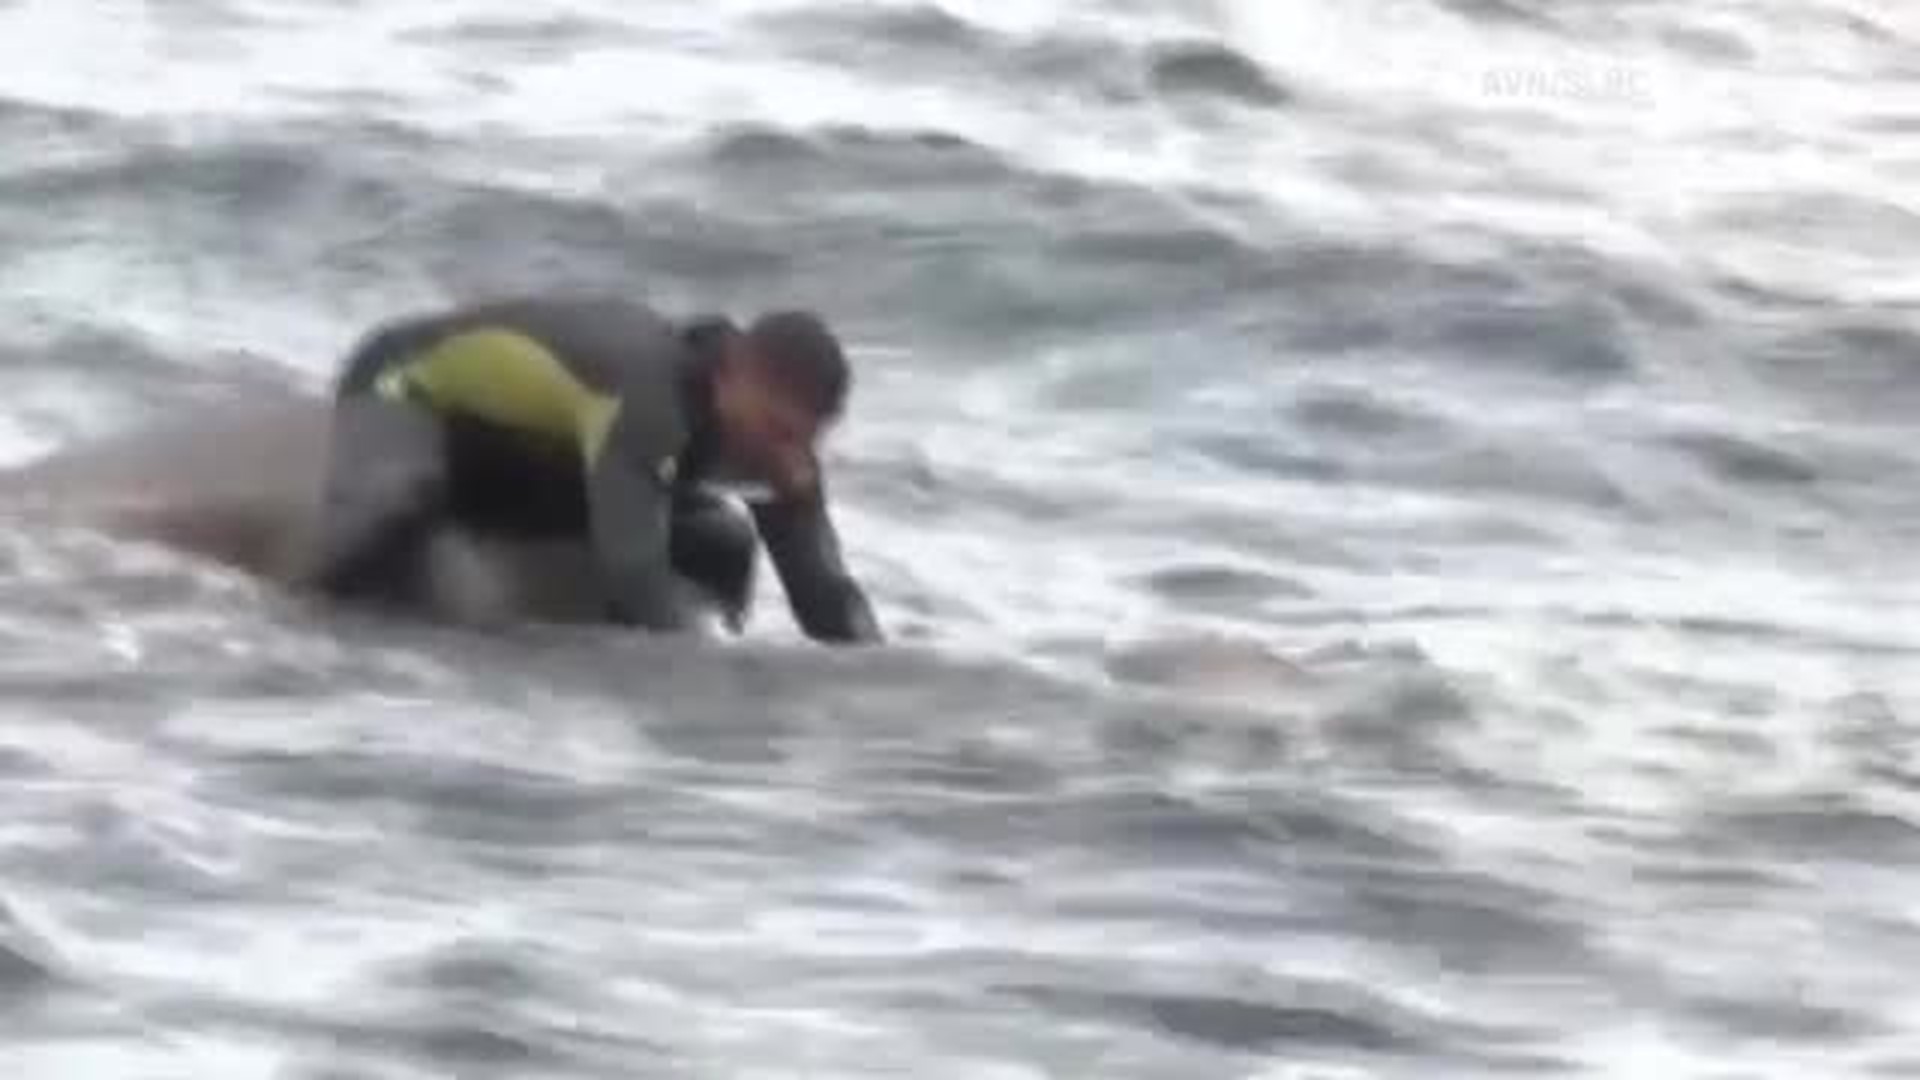 Navy Divers Rescue Drowning Elephant from Ocean